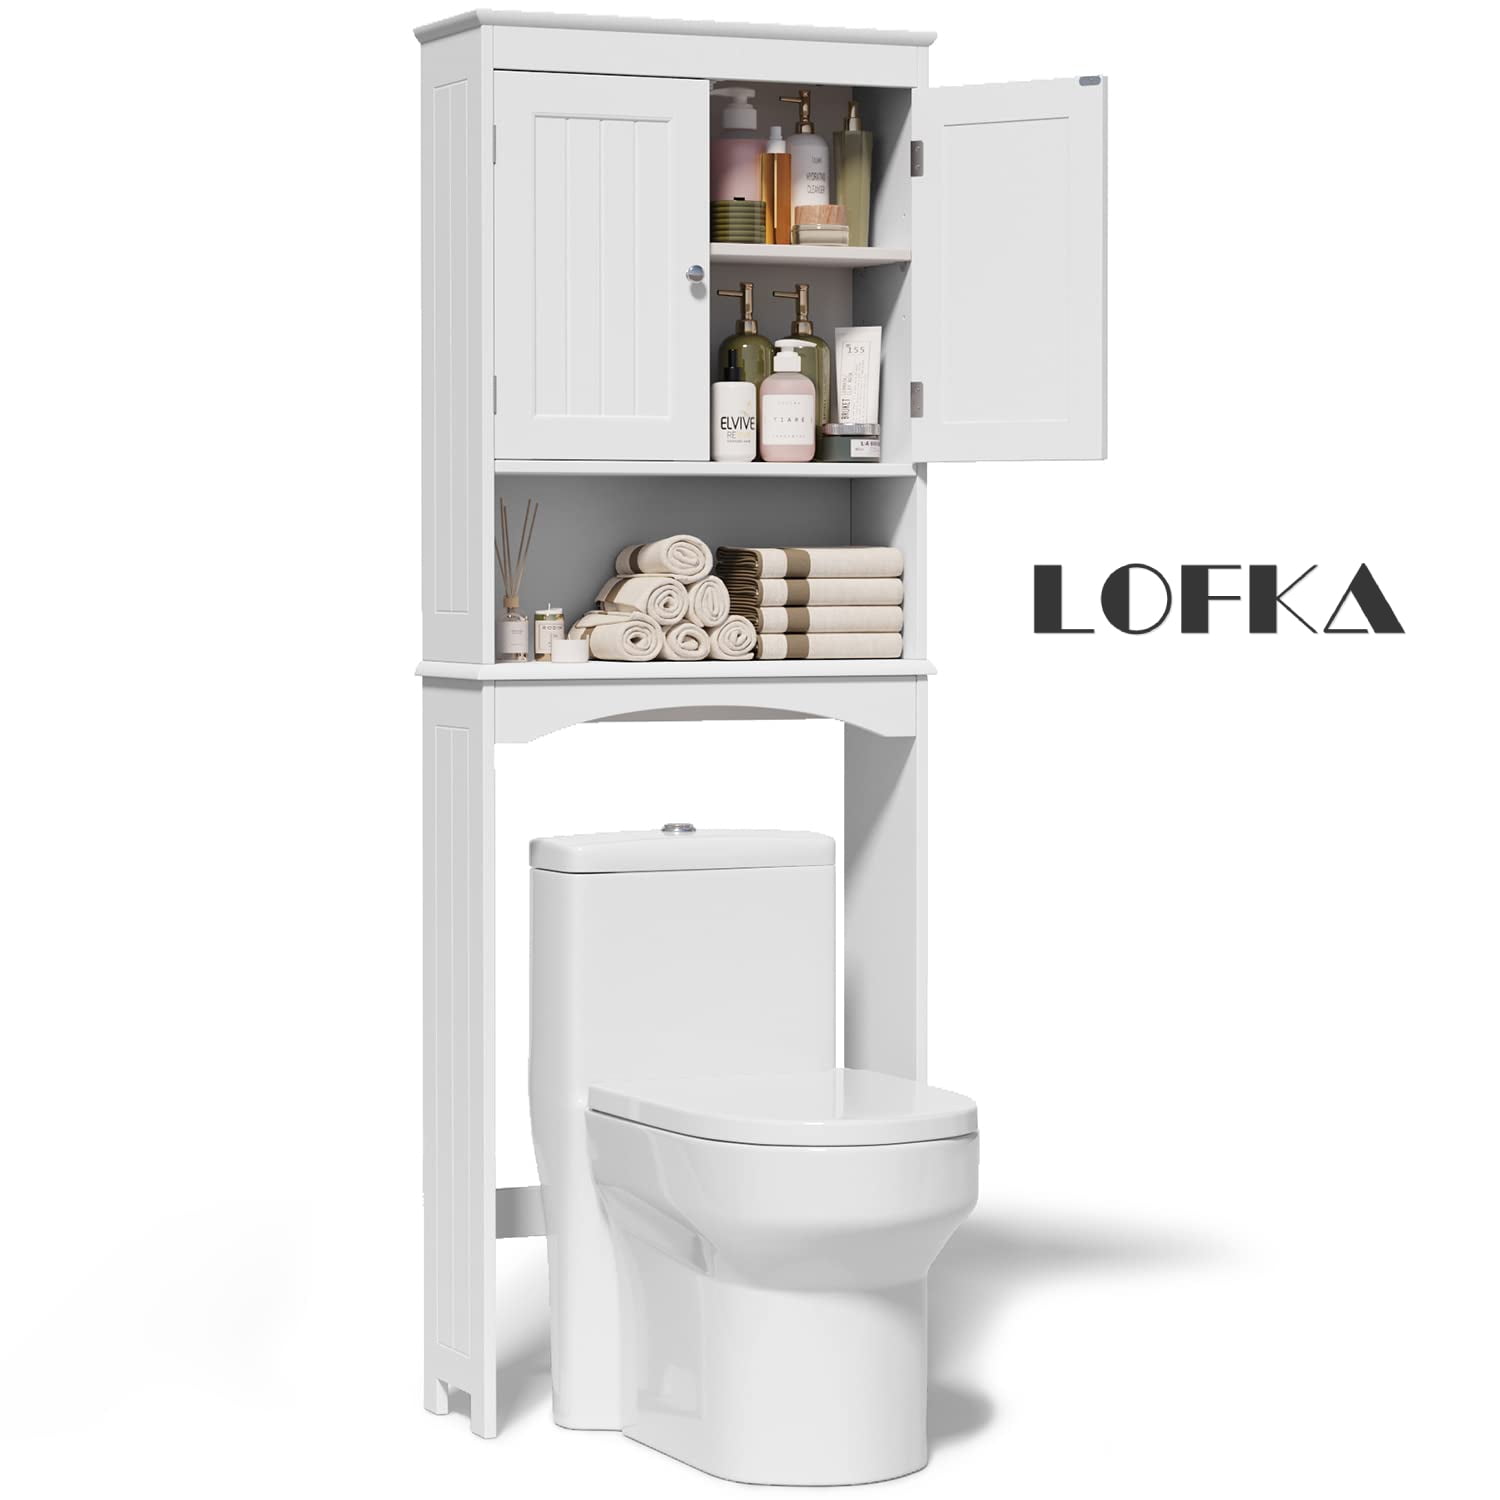 Furniouse Over The Toilet Storage Cabinet with Toilet Paper Holder Stand,  Mass-Storage Over Toilet Bathroom Organizer with Sliding Door, Space-Saving